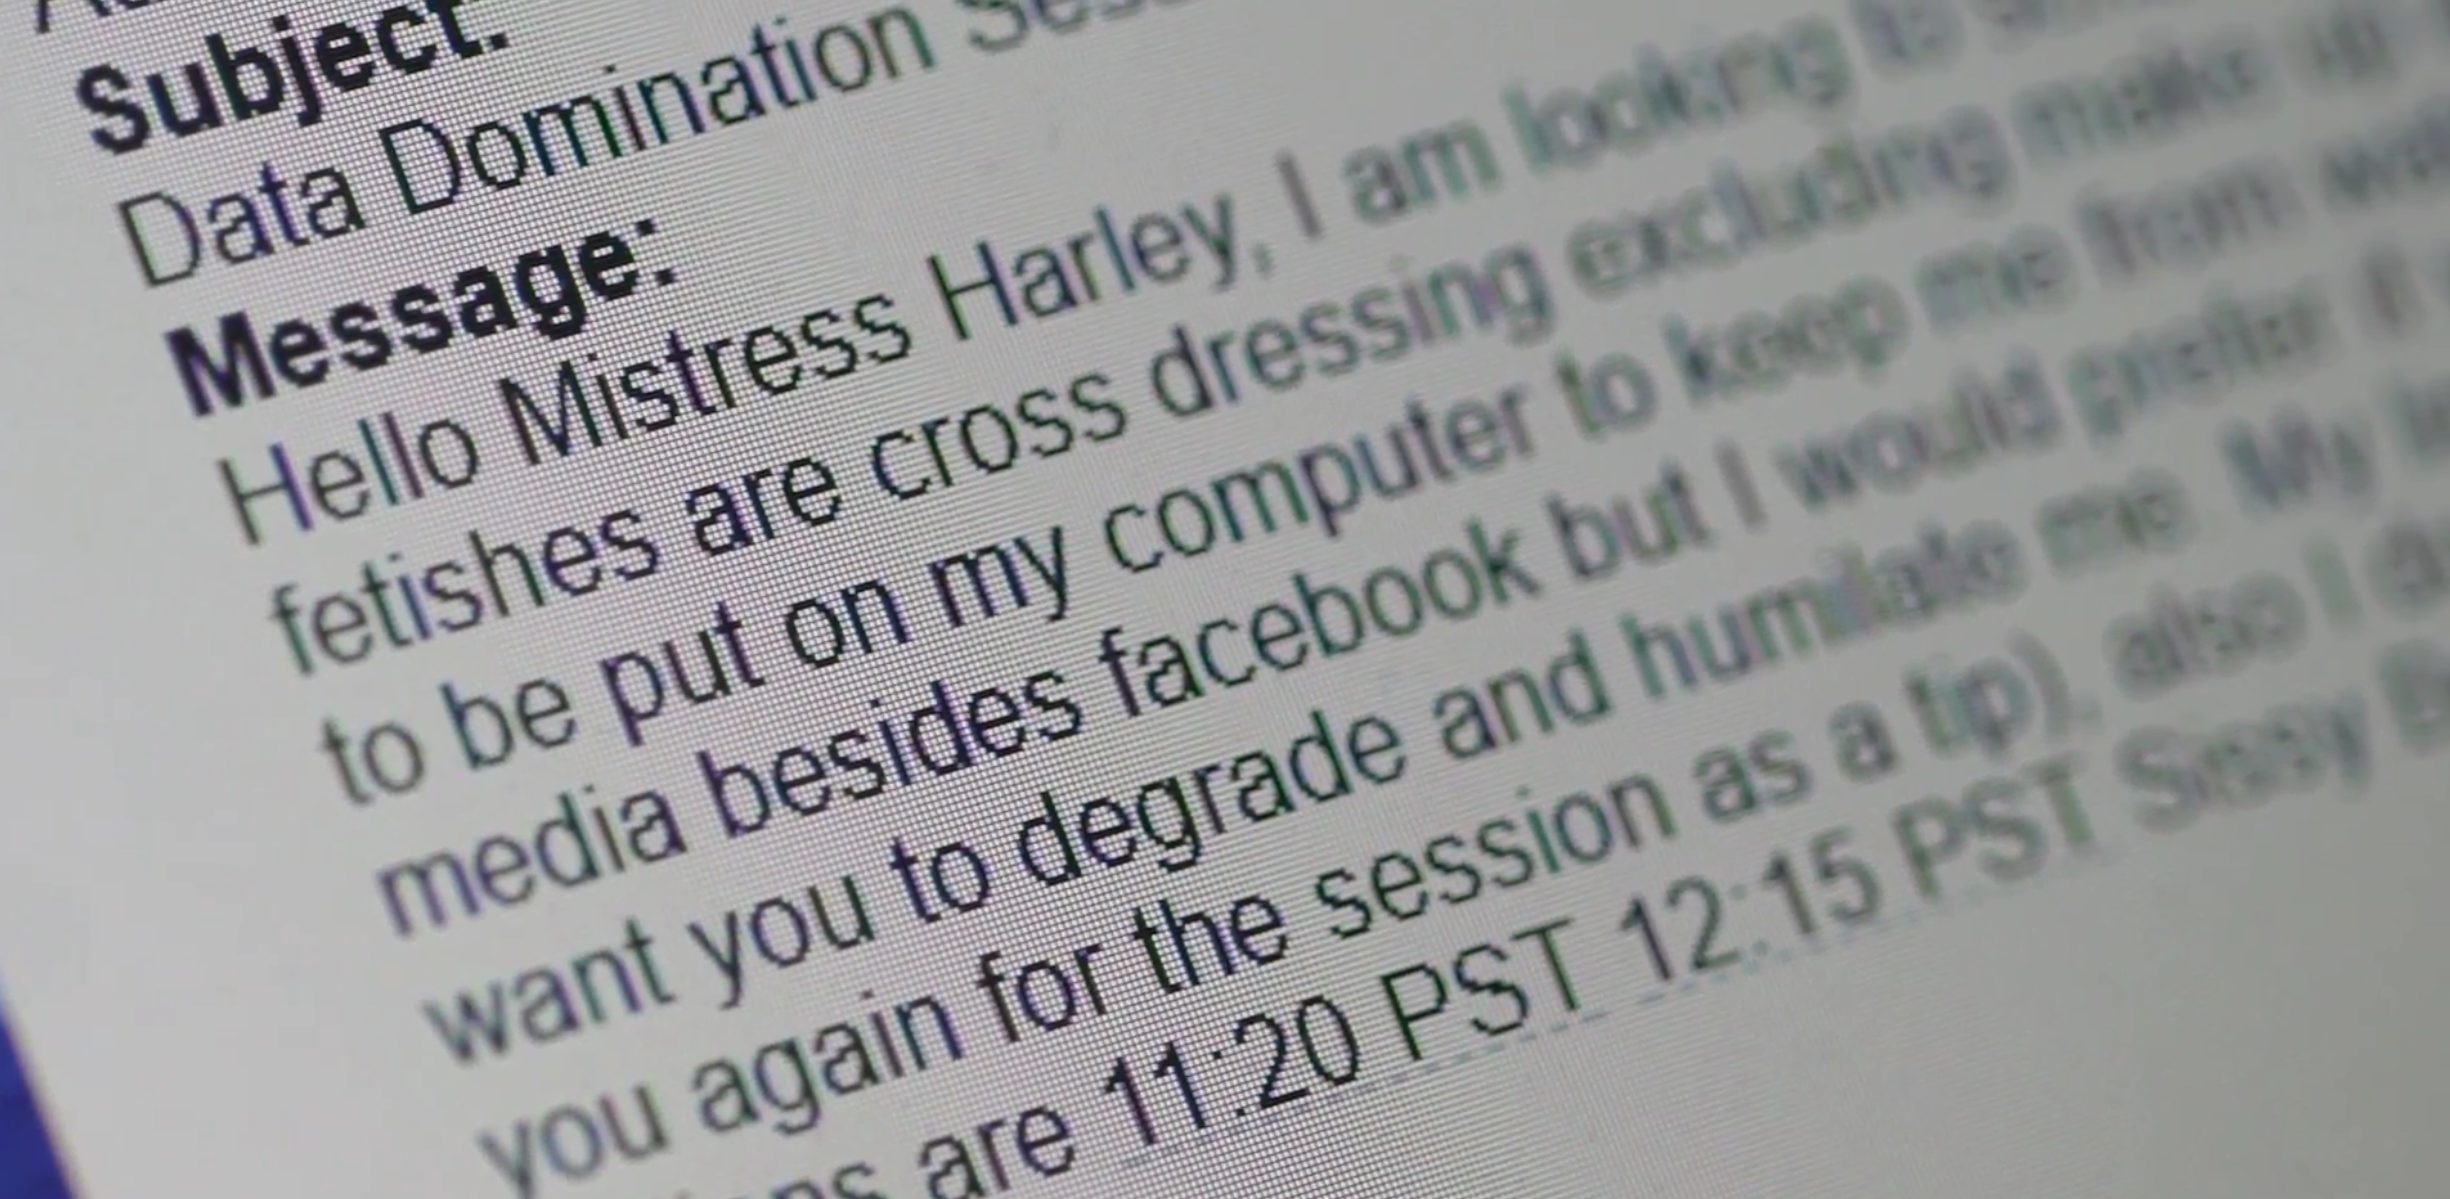 Image of computer screen zoomed up to show a message with the subject showing "Data Domination" asking Mistress Harley something about cross dressing, facebook, and asking to be degraded and humiliated.